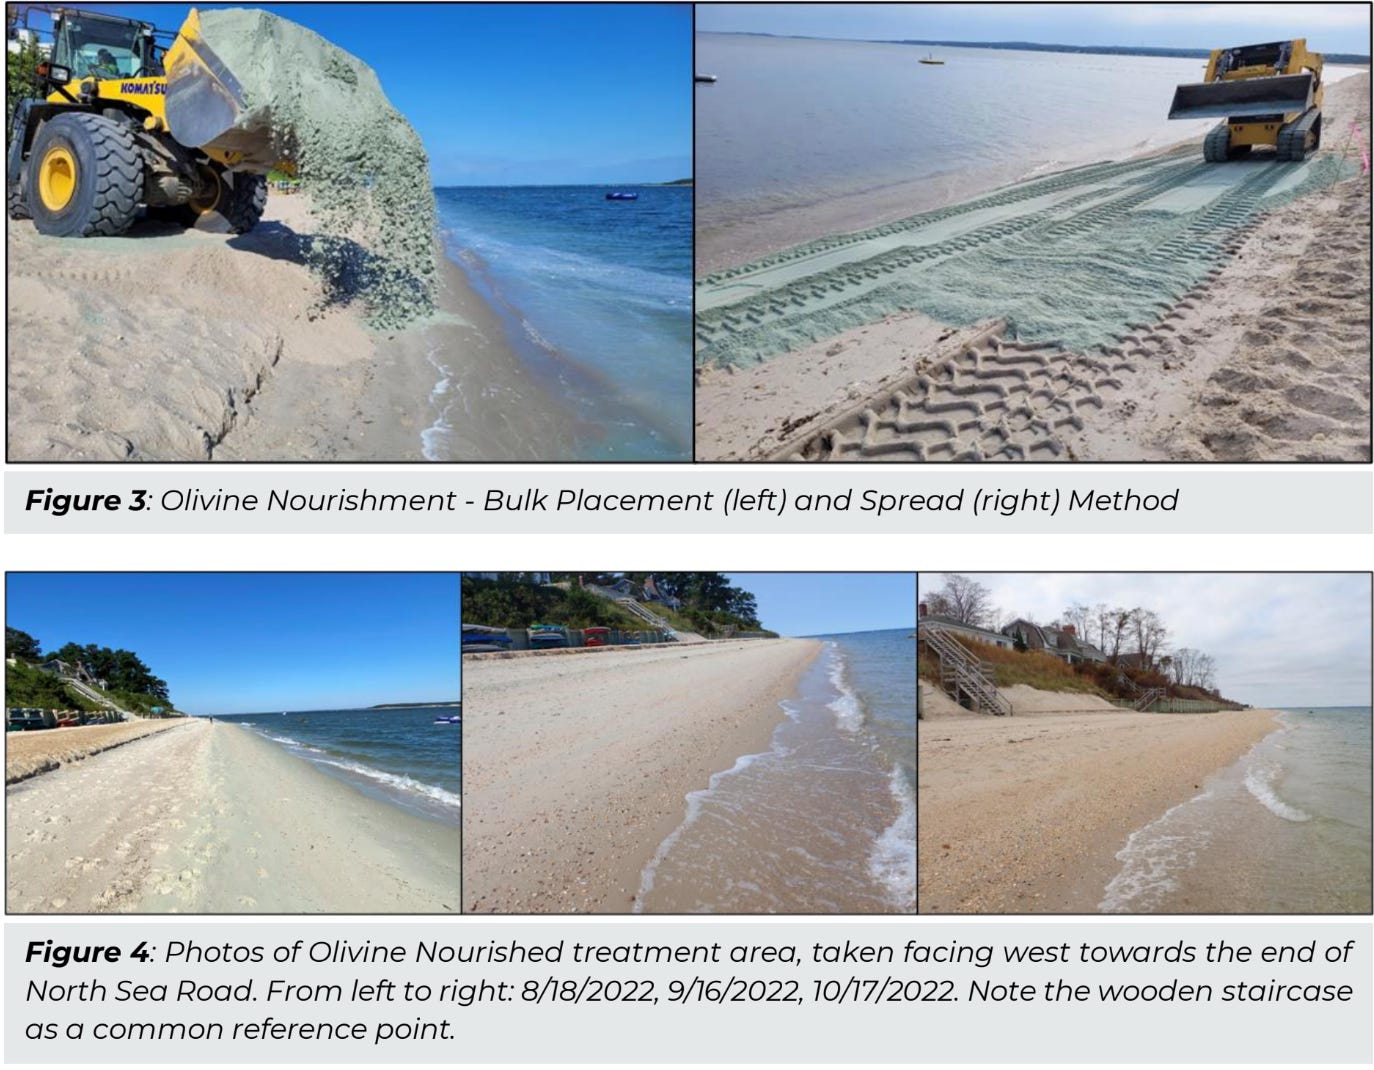 Photos of olivine being placed on a beach in the Hamptons